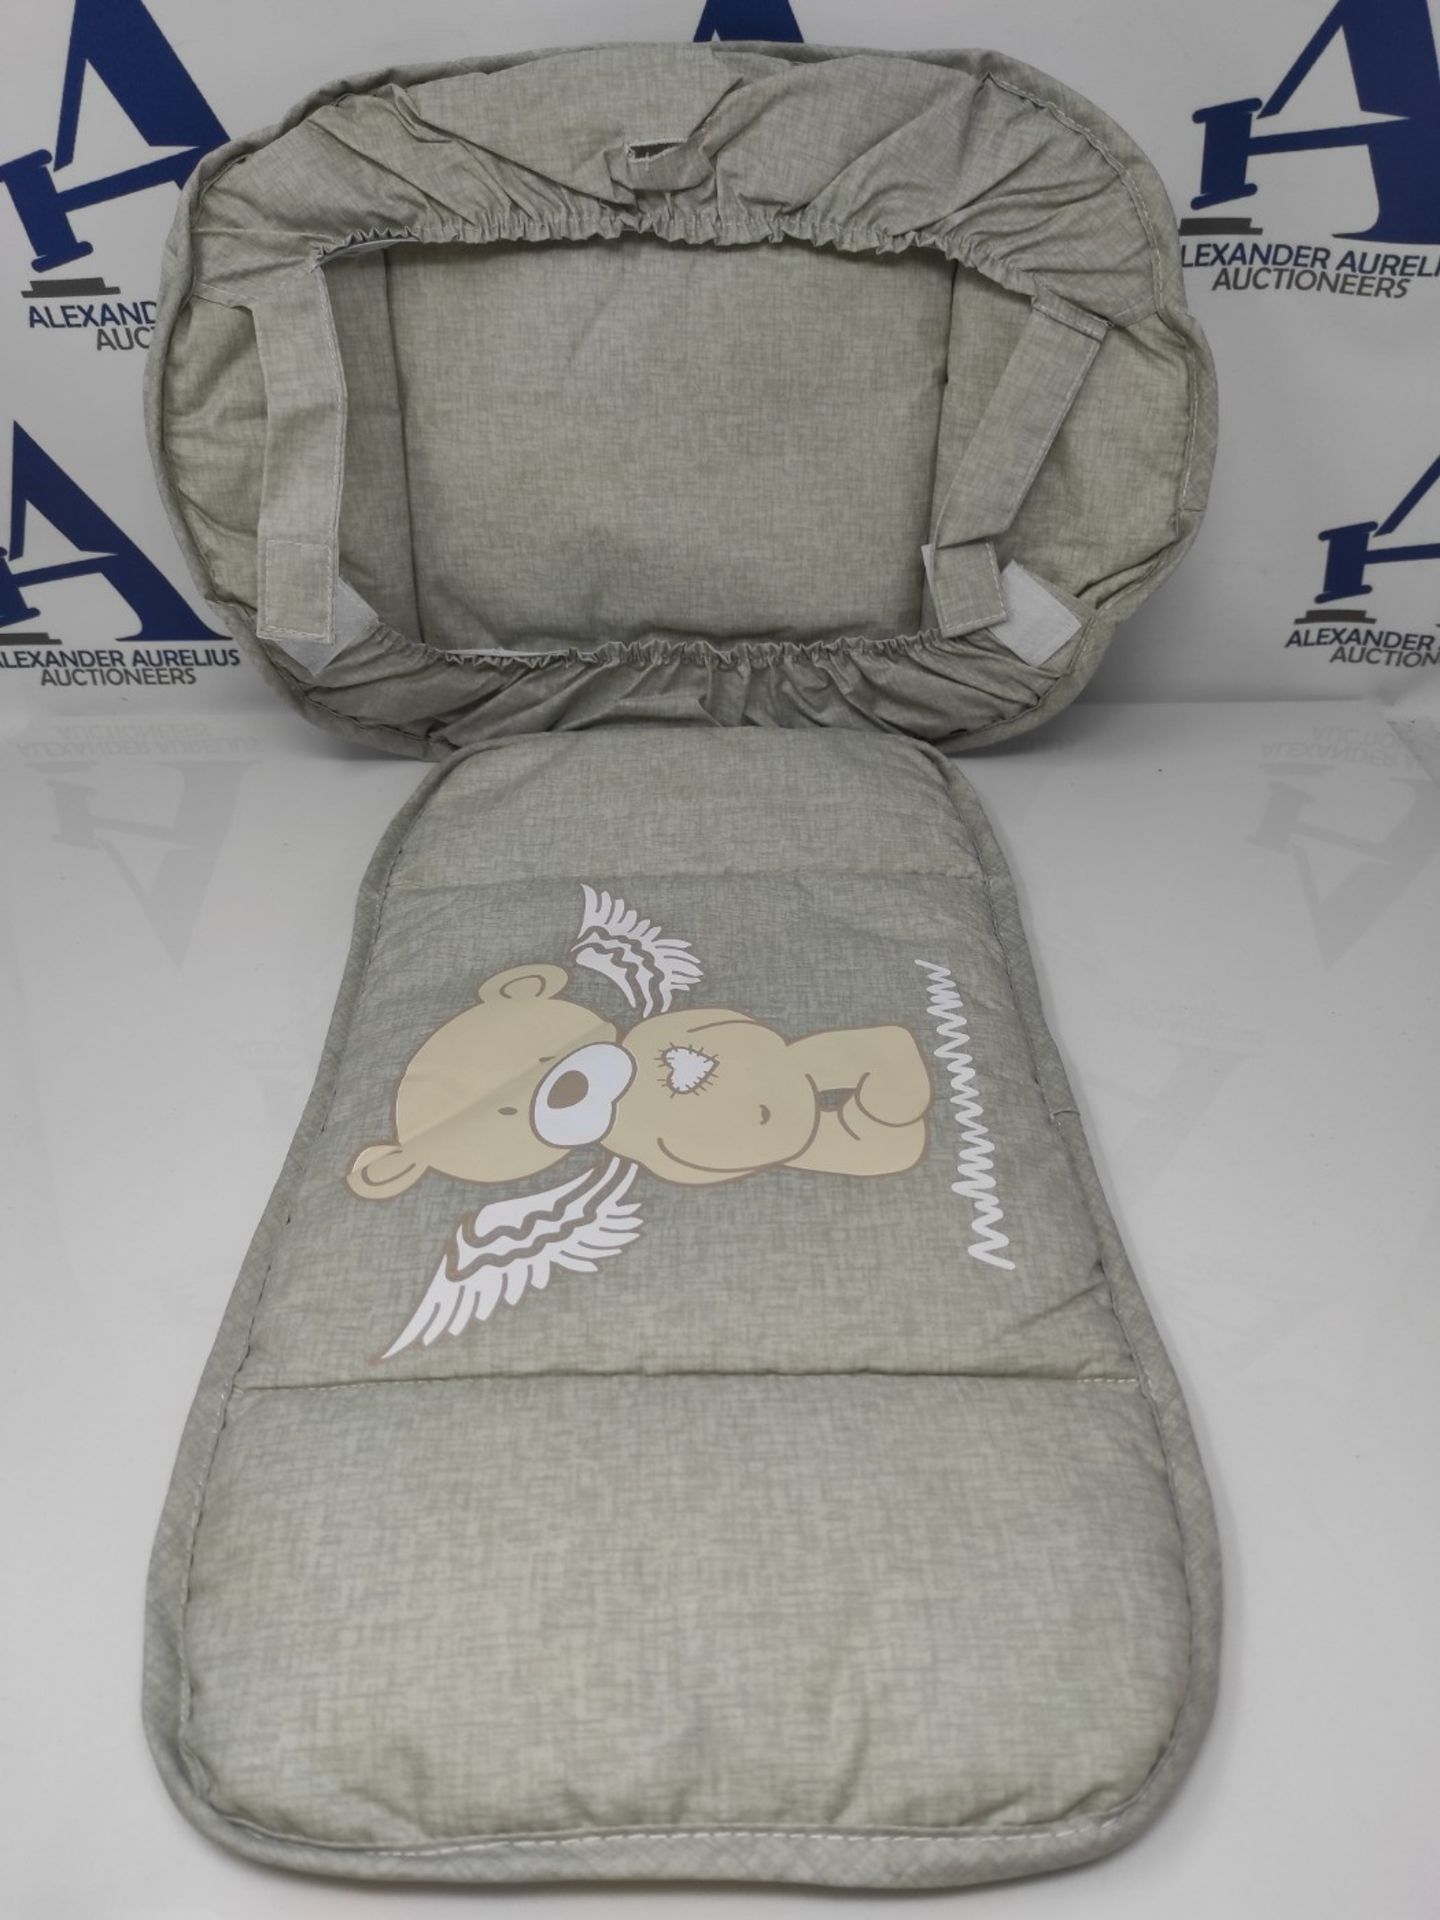 High Chair Cushion Heartbreaker in 2 Pieces - Soft Seat Reducer - Bear Angel Print - G - Image 3 of 3